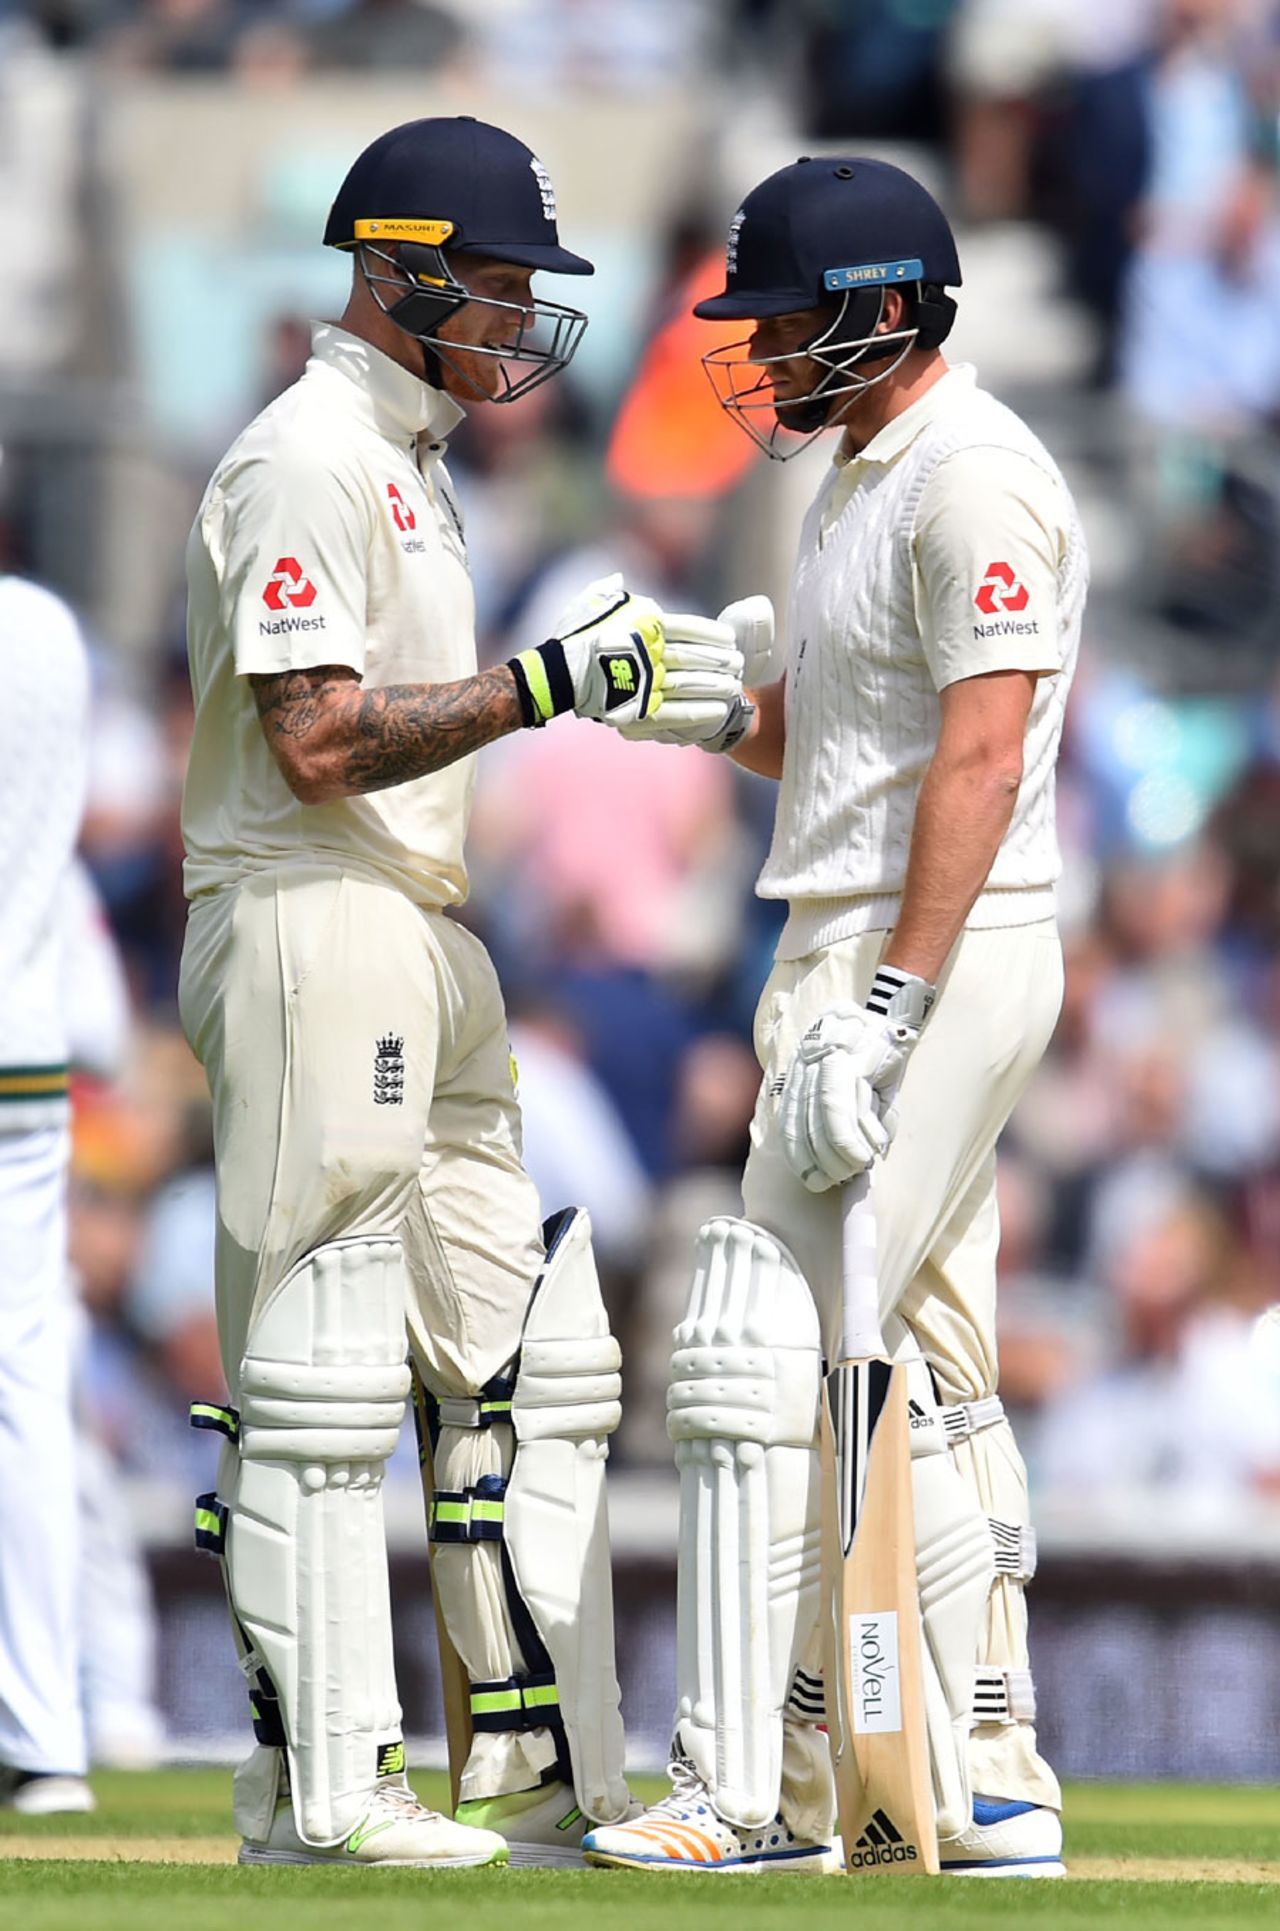 Ben Stokes and Jonny Bairstow added 75 in short order, England v South Africa, 3rd Investec Test, The Oval, 2nd day, July 28, 2017